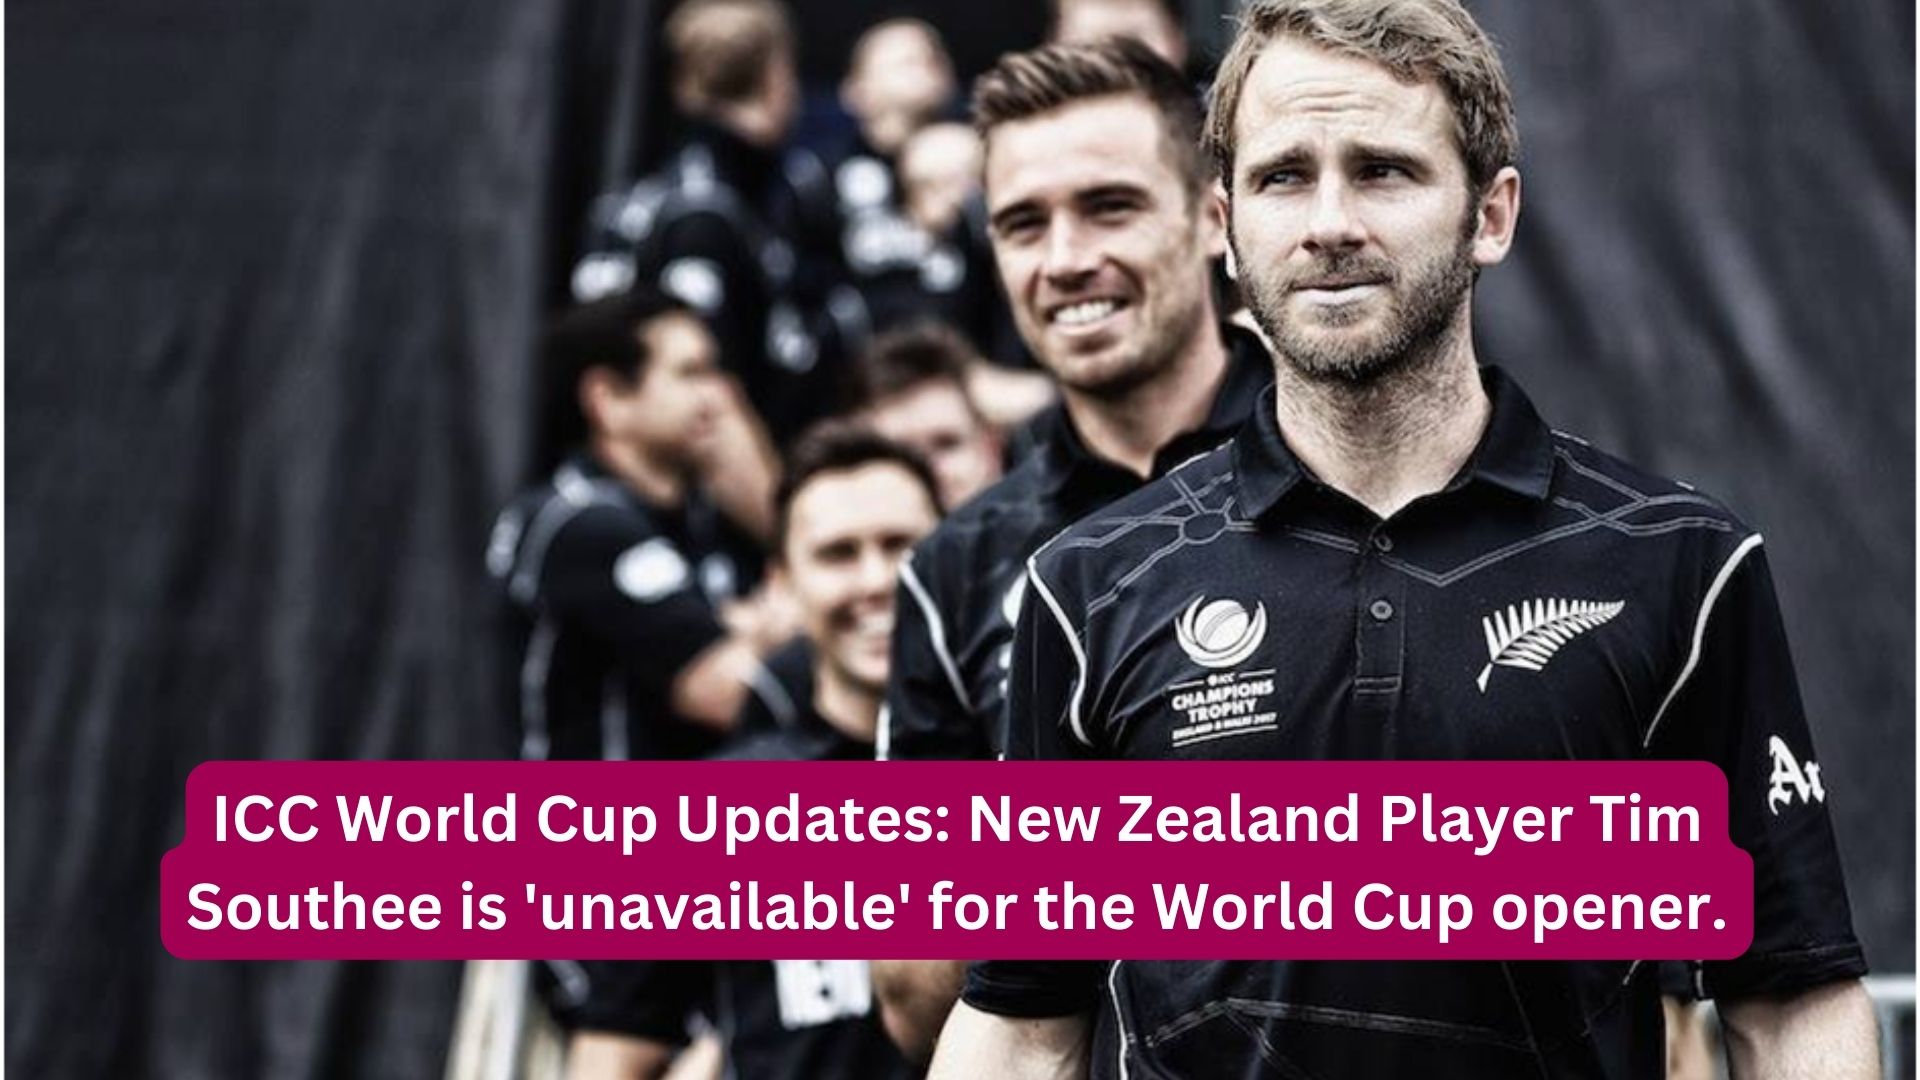 ICC World Cup Updates: New Zealand Player Tim Southee is 'unavailable' for the World Cup opener.